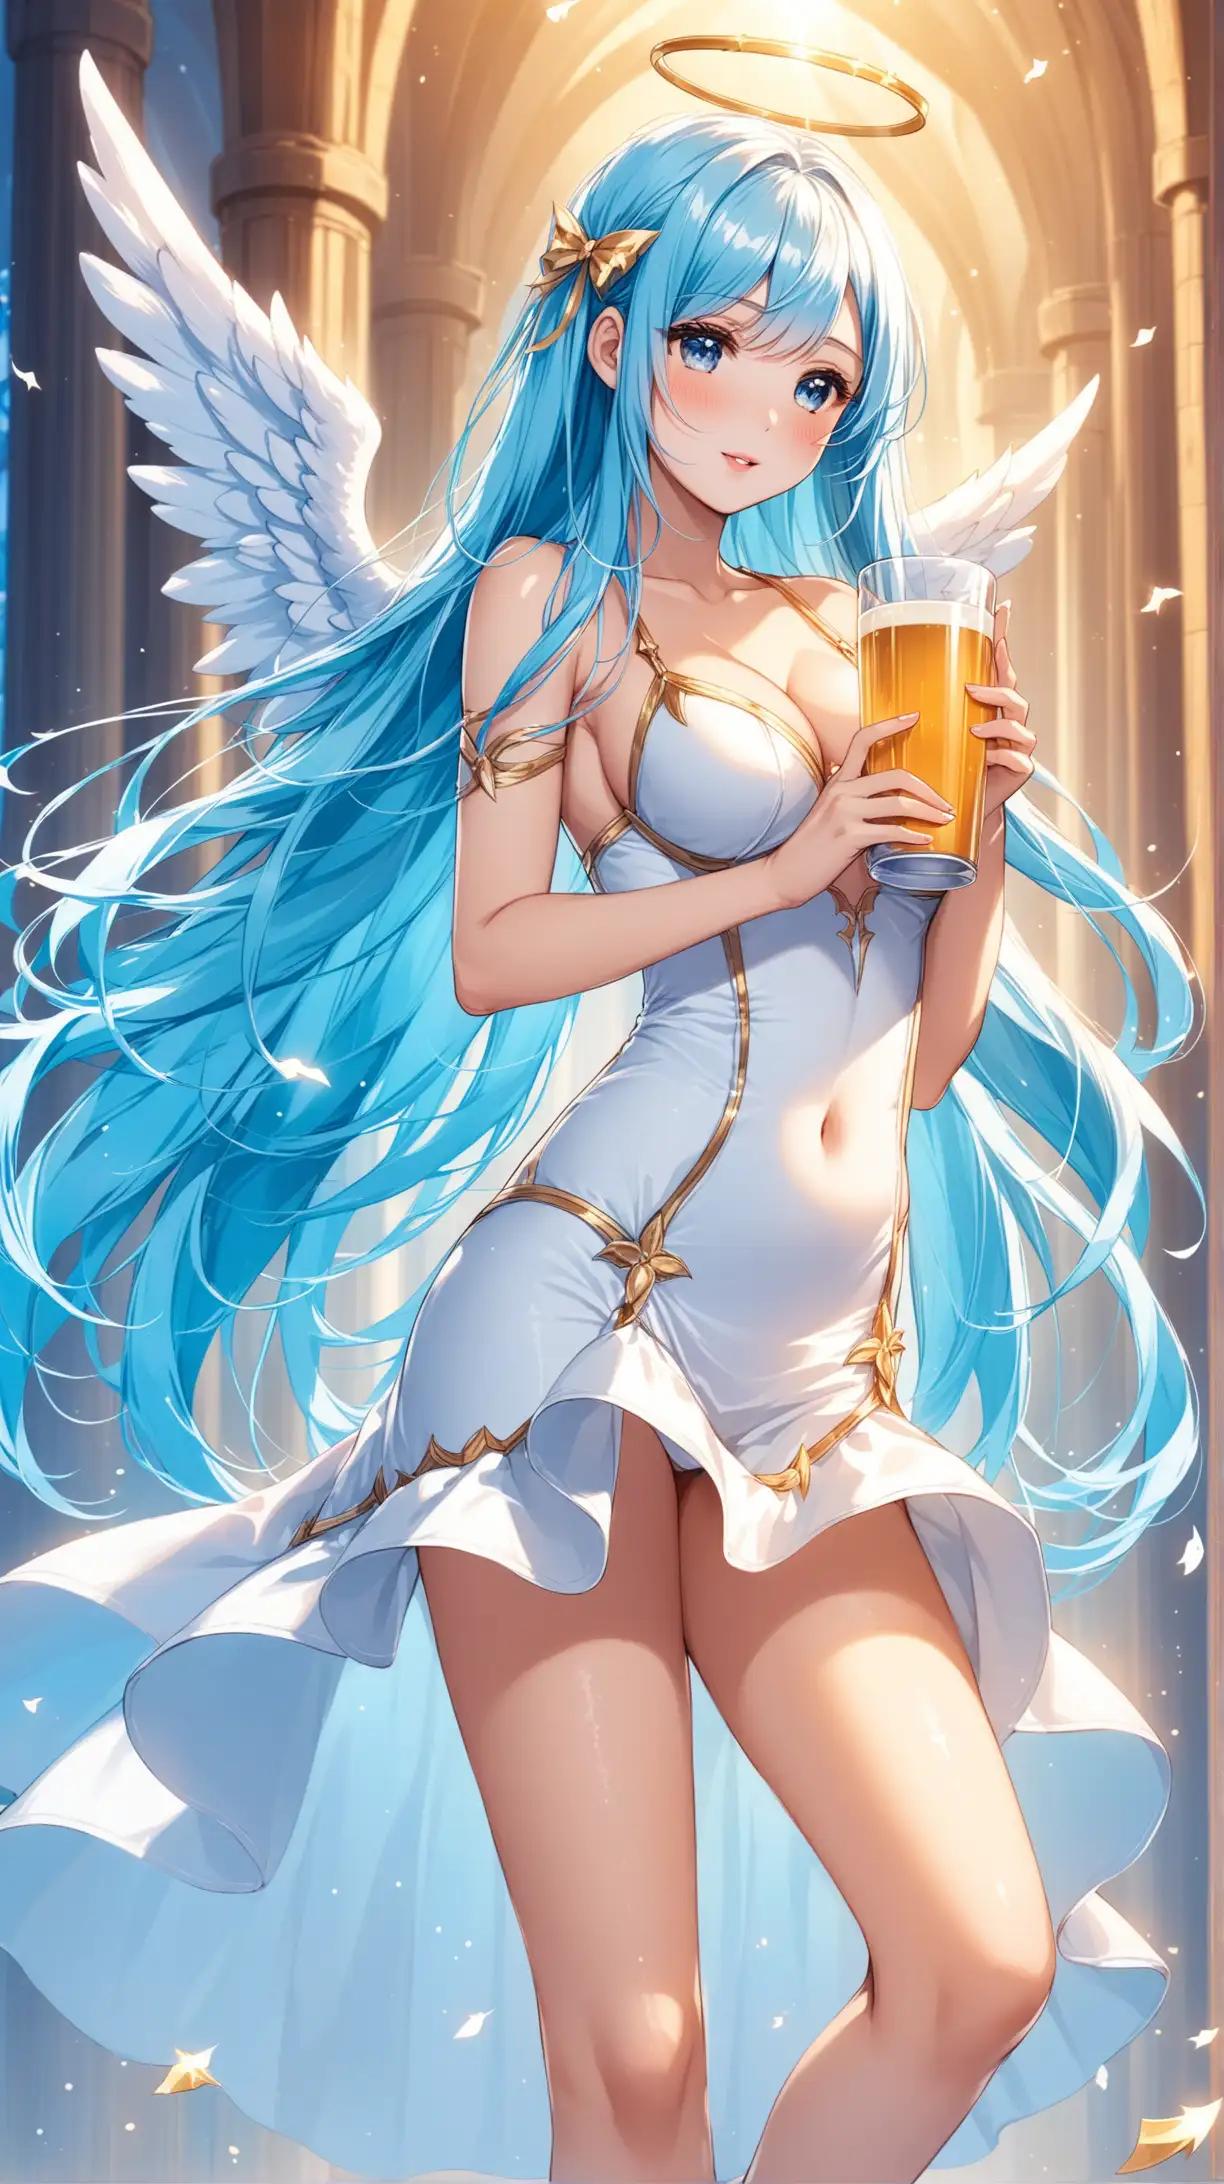 Sexy women carry cup , angel costume, playful, light blue long hair, white short sexy dress, fantastic background 